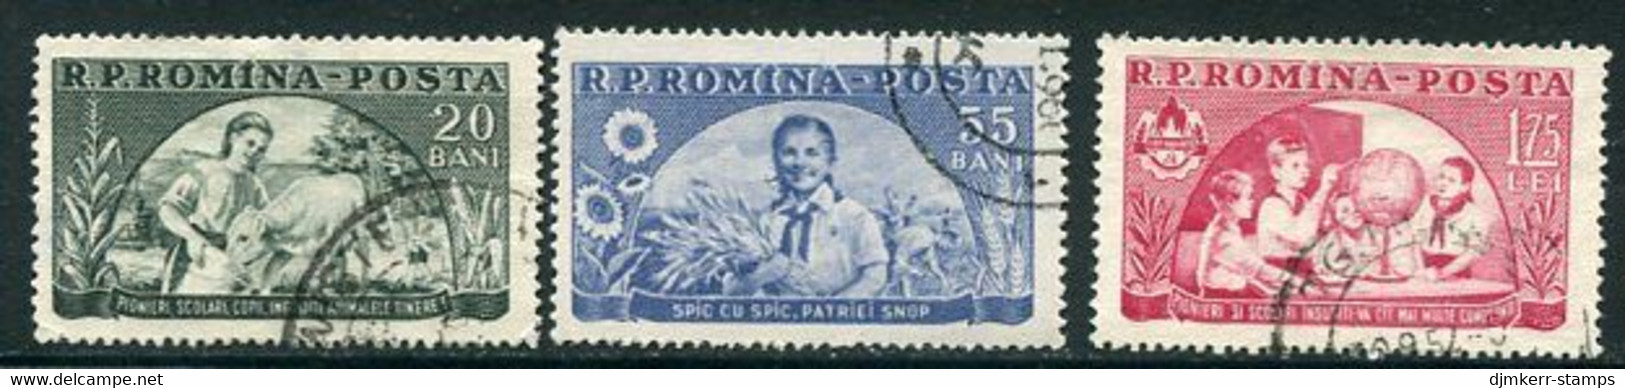 ROMANIA 1954 Young Pioneers Used,  Michel 1474-76 - Used Stamps